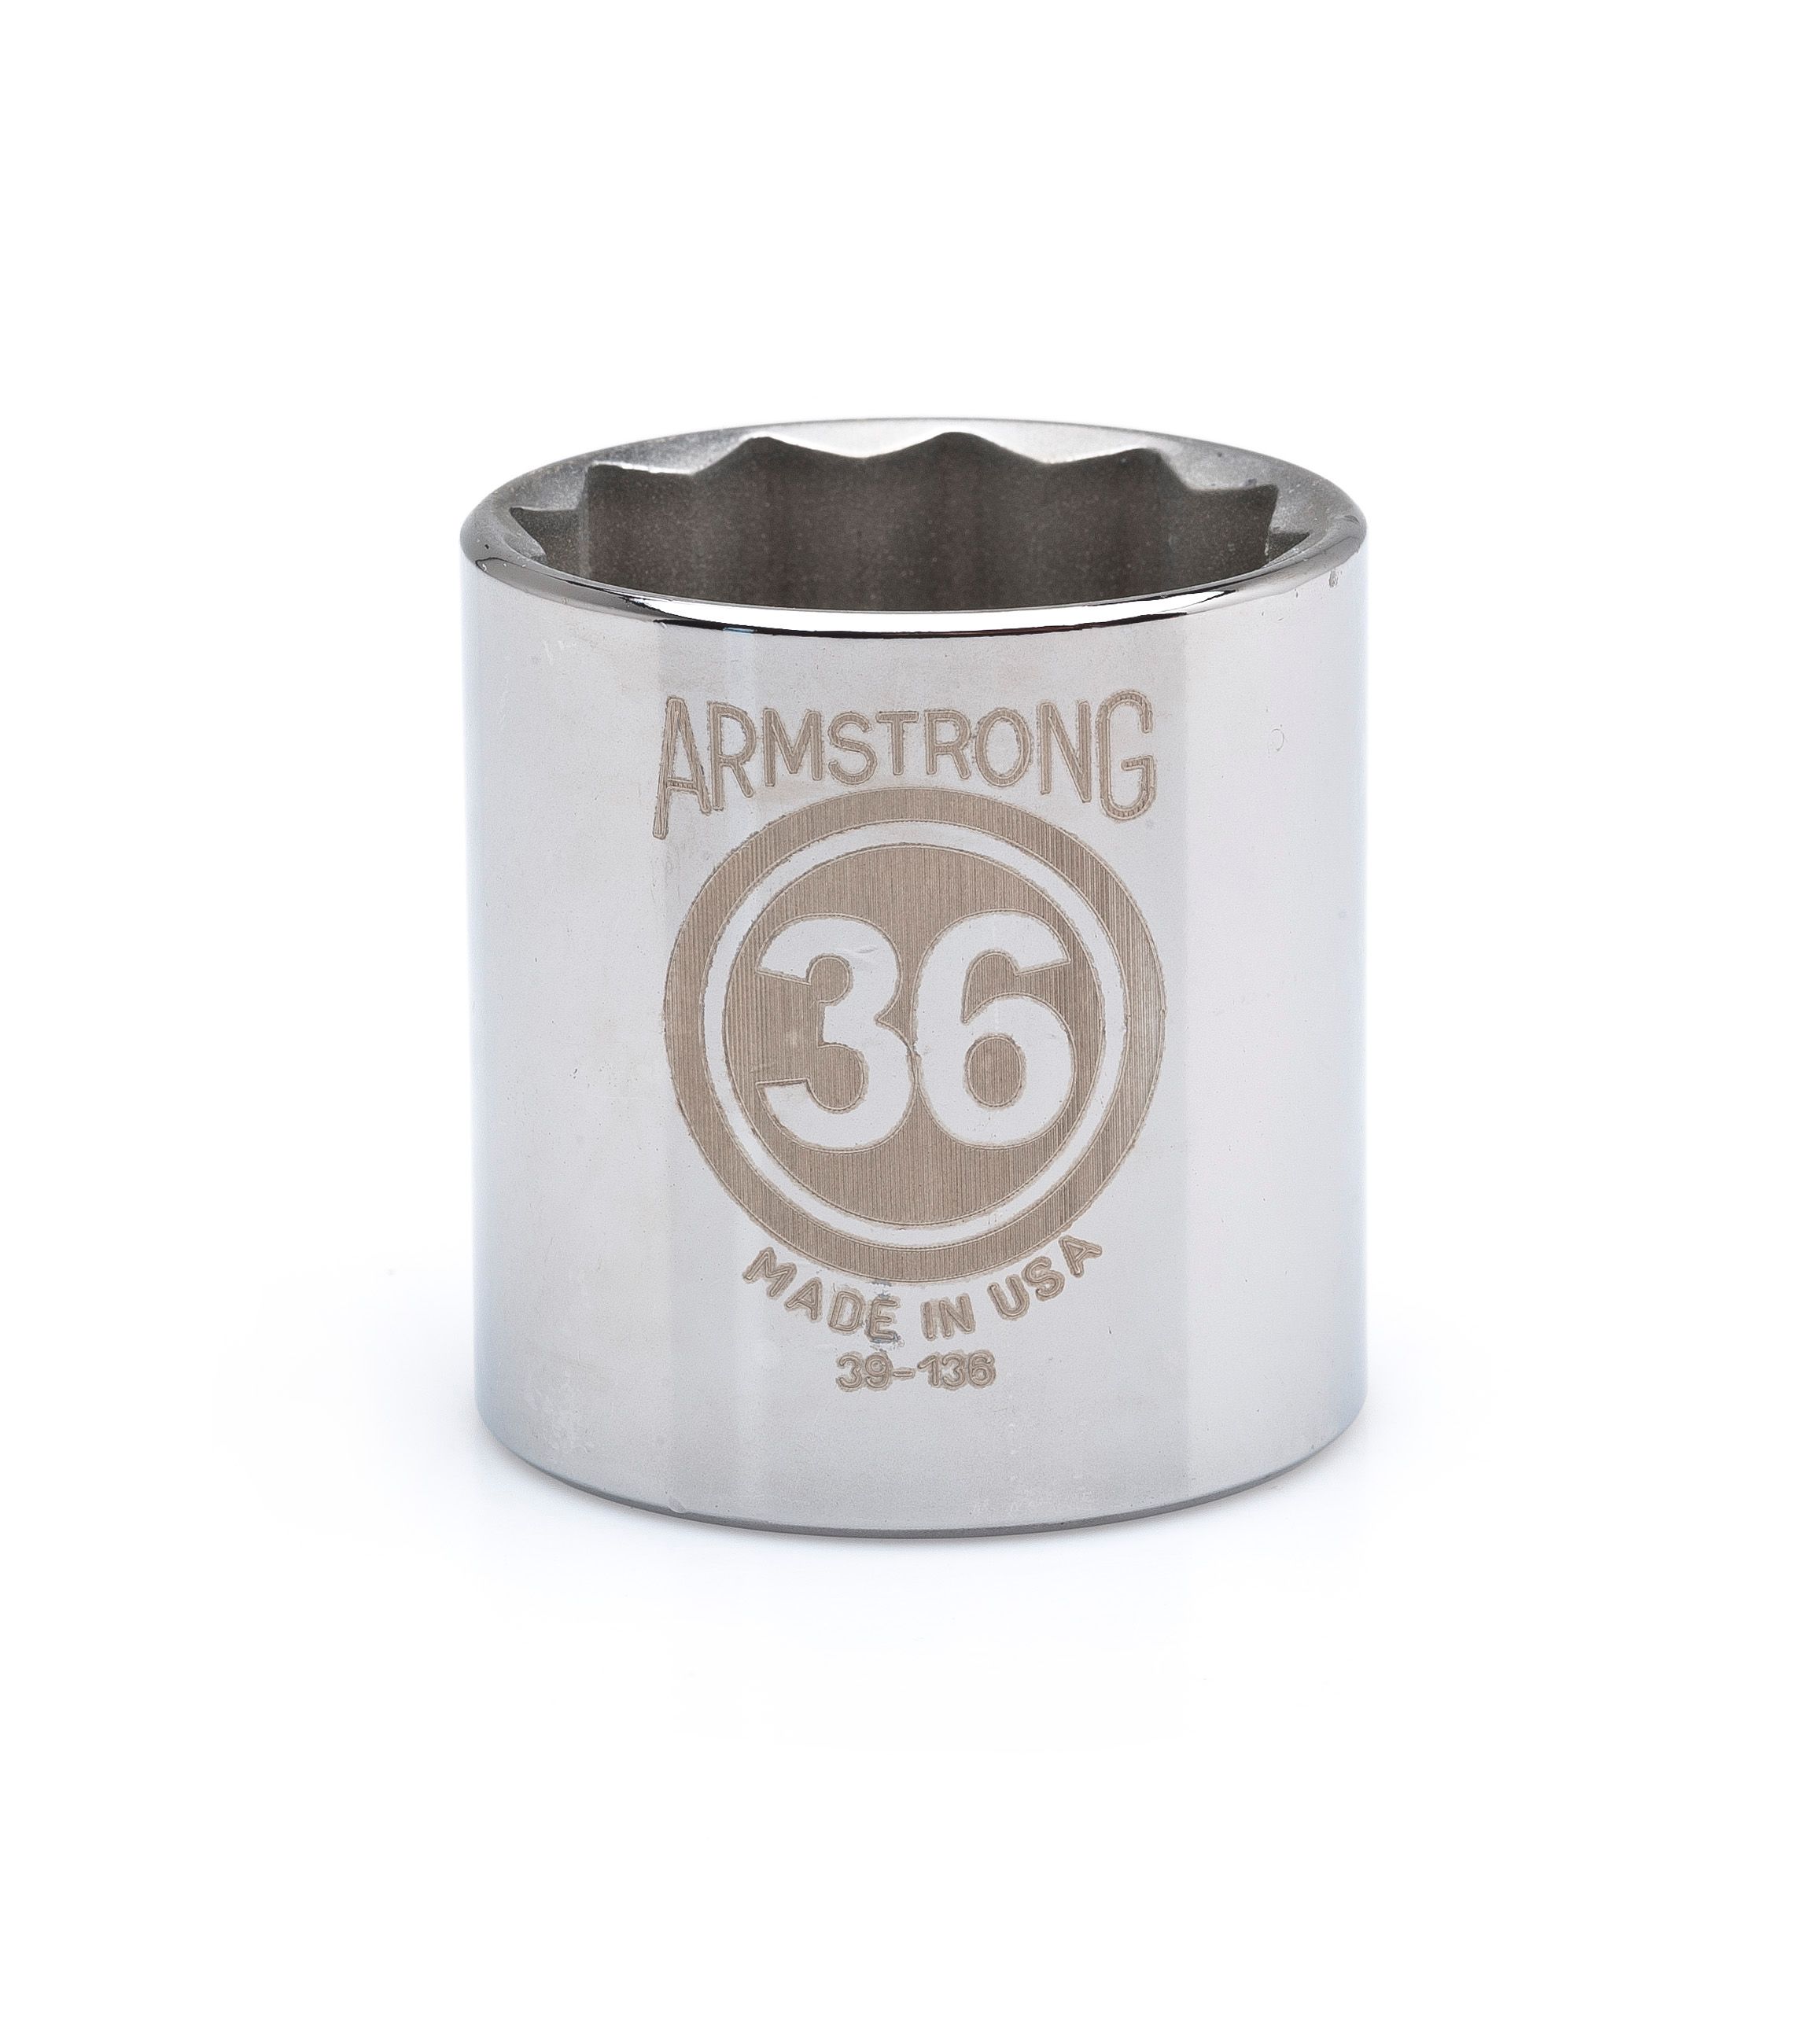 Armstrong Tools 1/2" Drive 12 Point Standard Socket 16mm